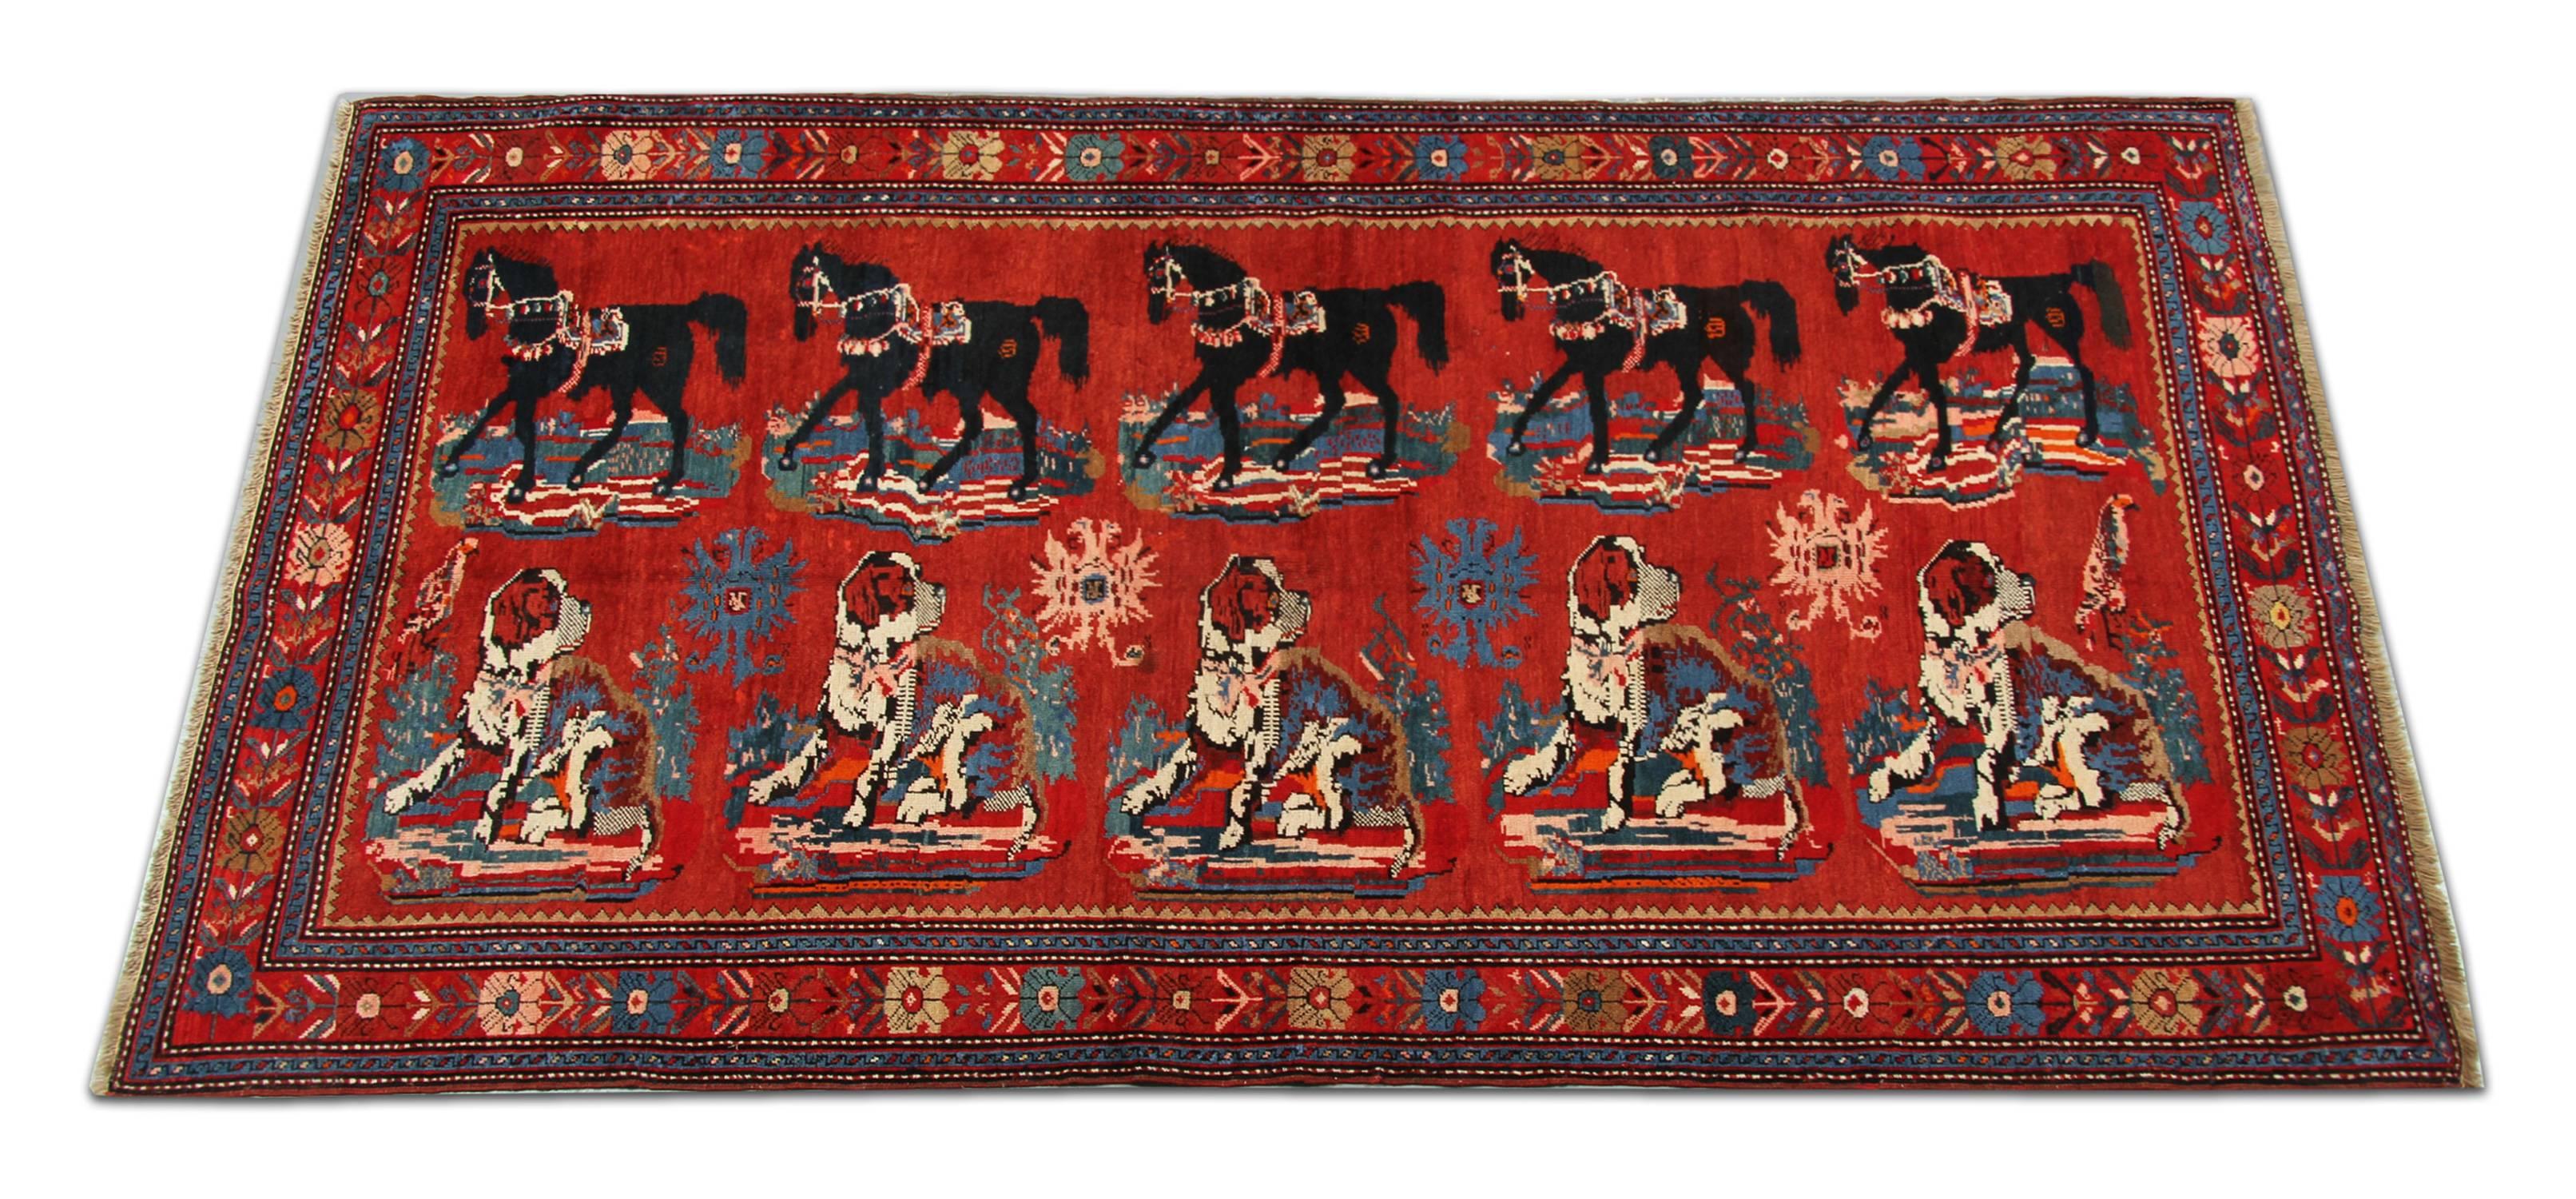 An excellent example of traditional Caucasian carpet rug weaving from the Karabagh region. These pictorial animal design patterned rugs can be the best element of home decor objects to give warmth to the environment because this woven rug has a